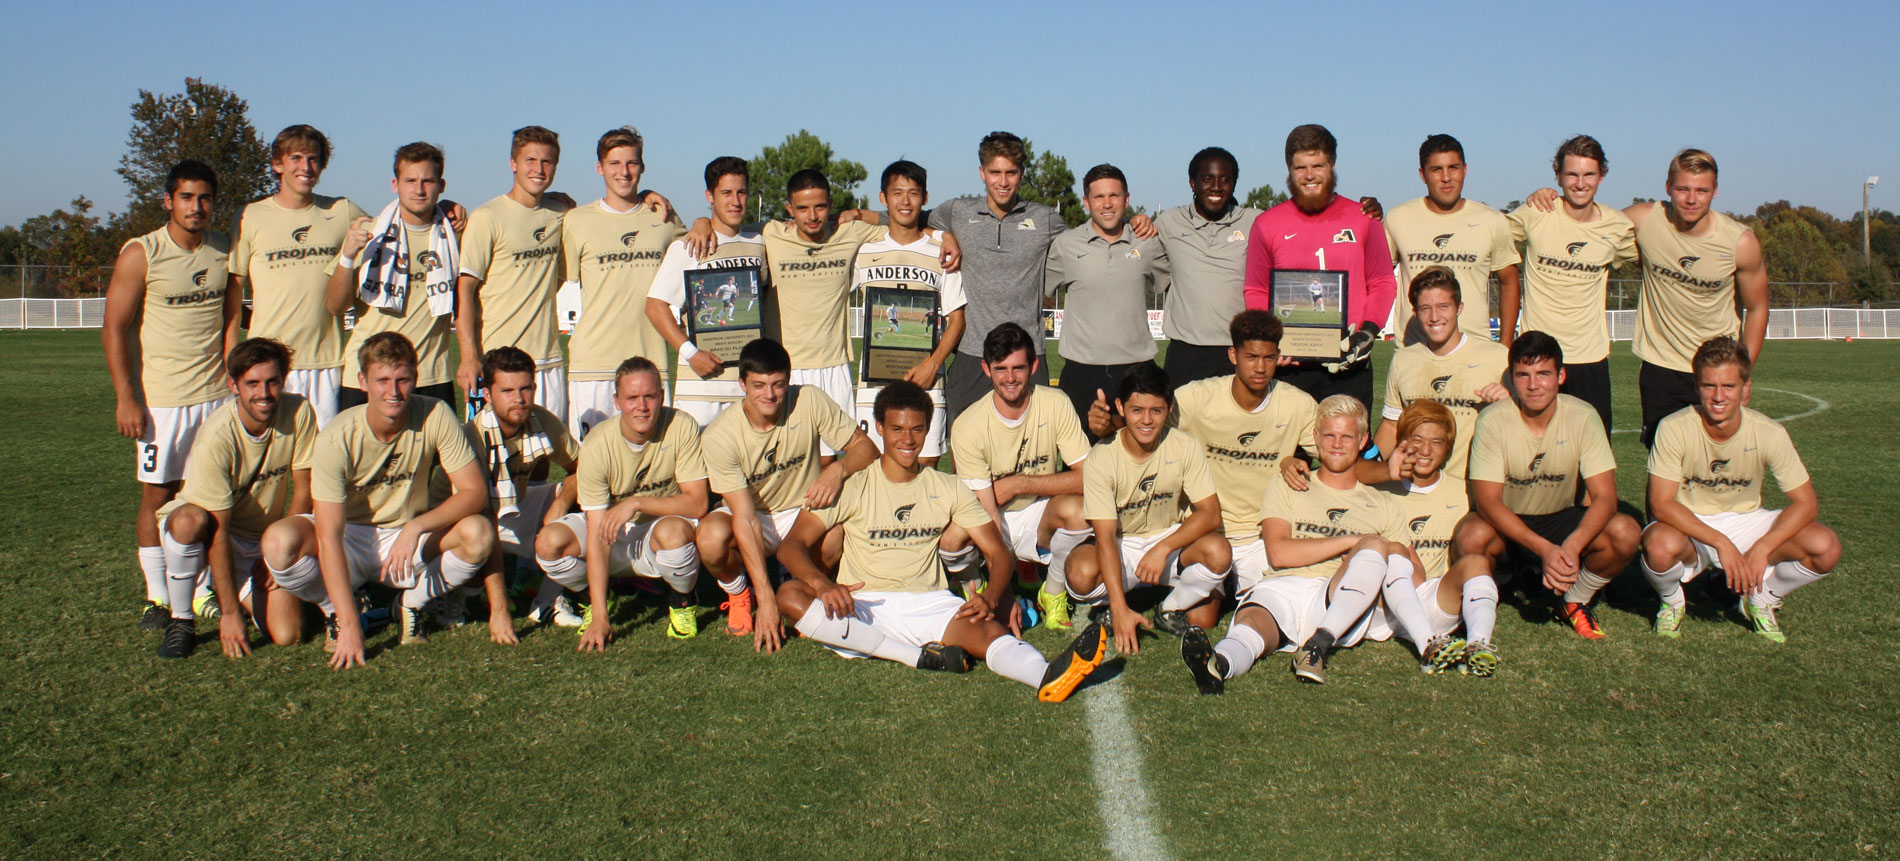 Trojans Send Seniors Out With a Win Over Mars Hill; 2-0